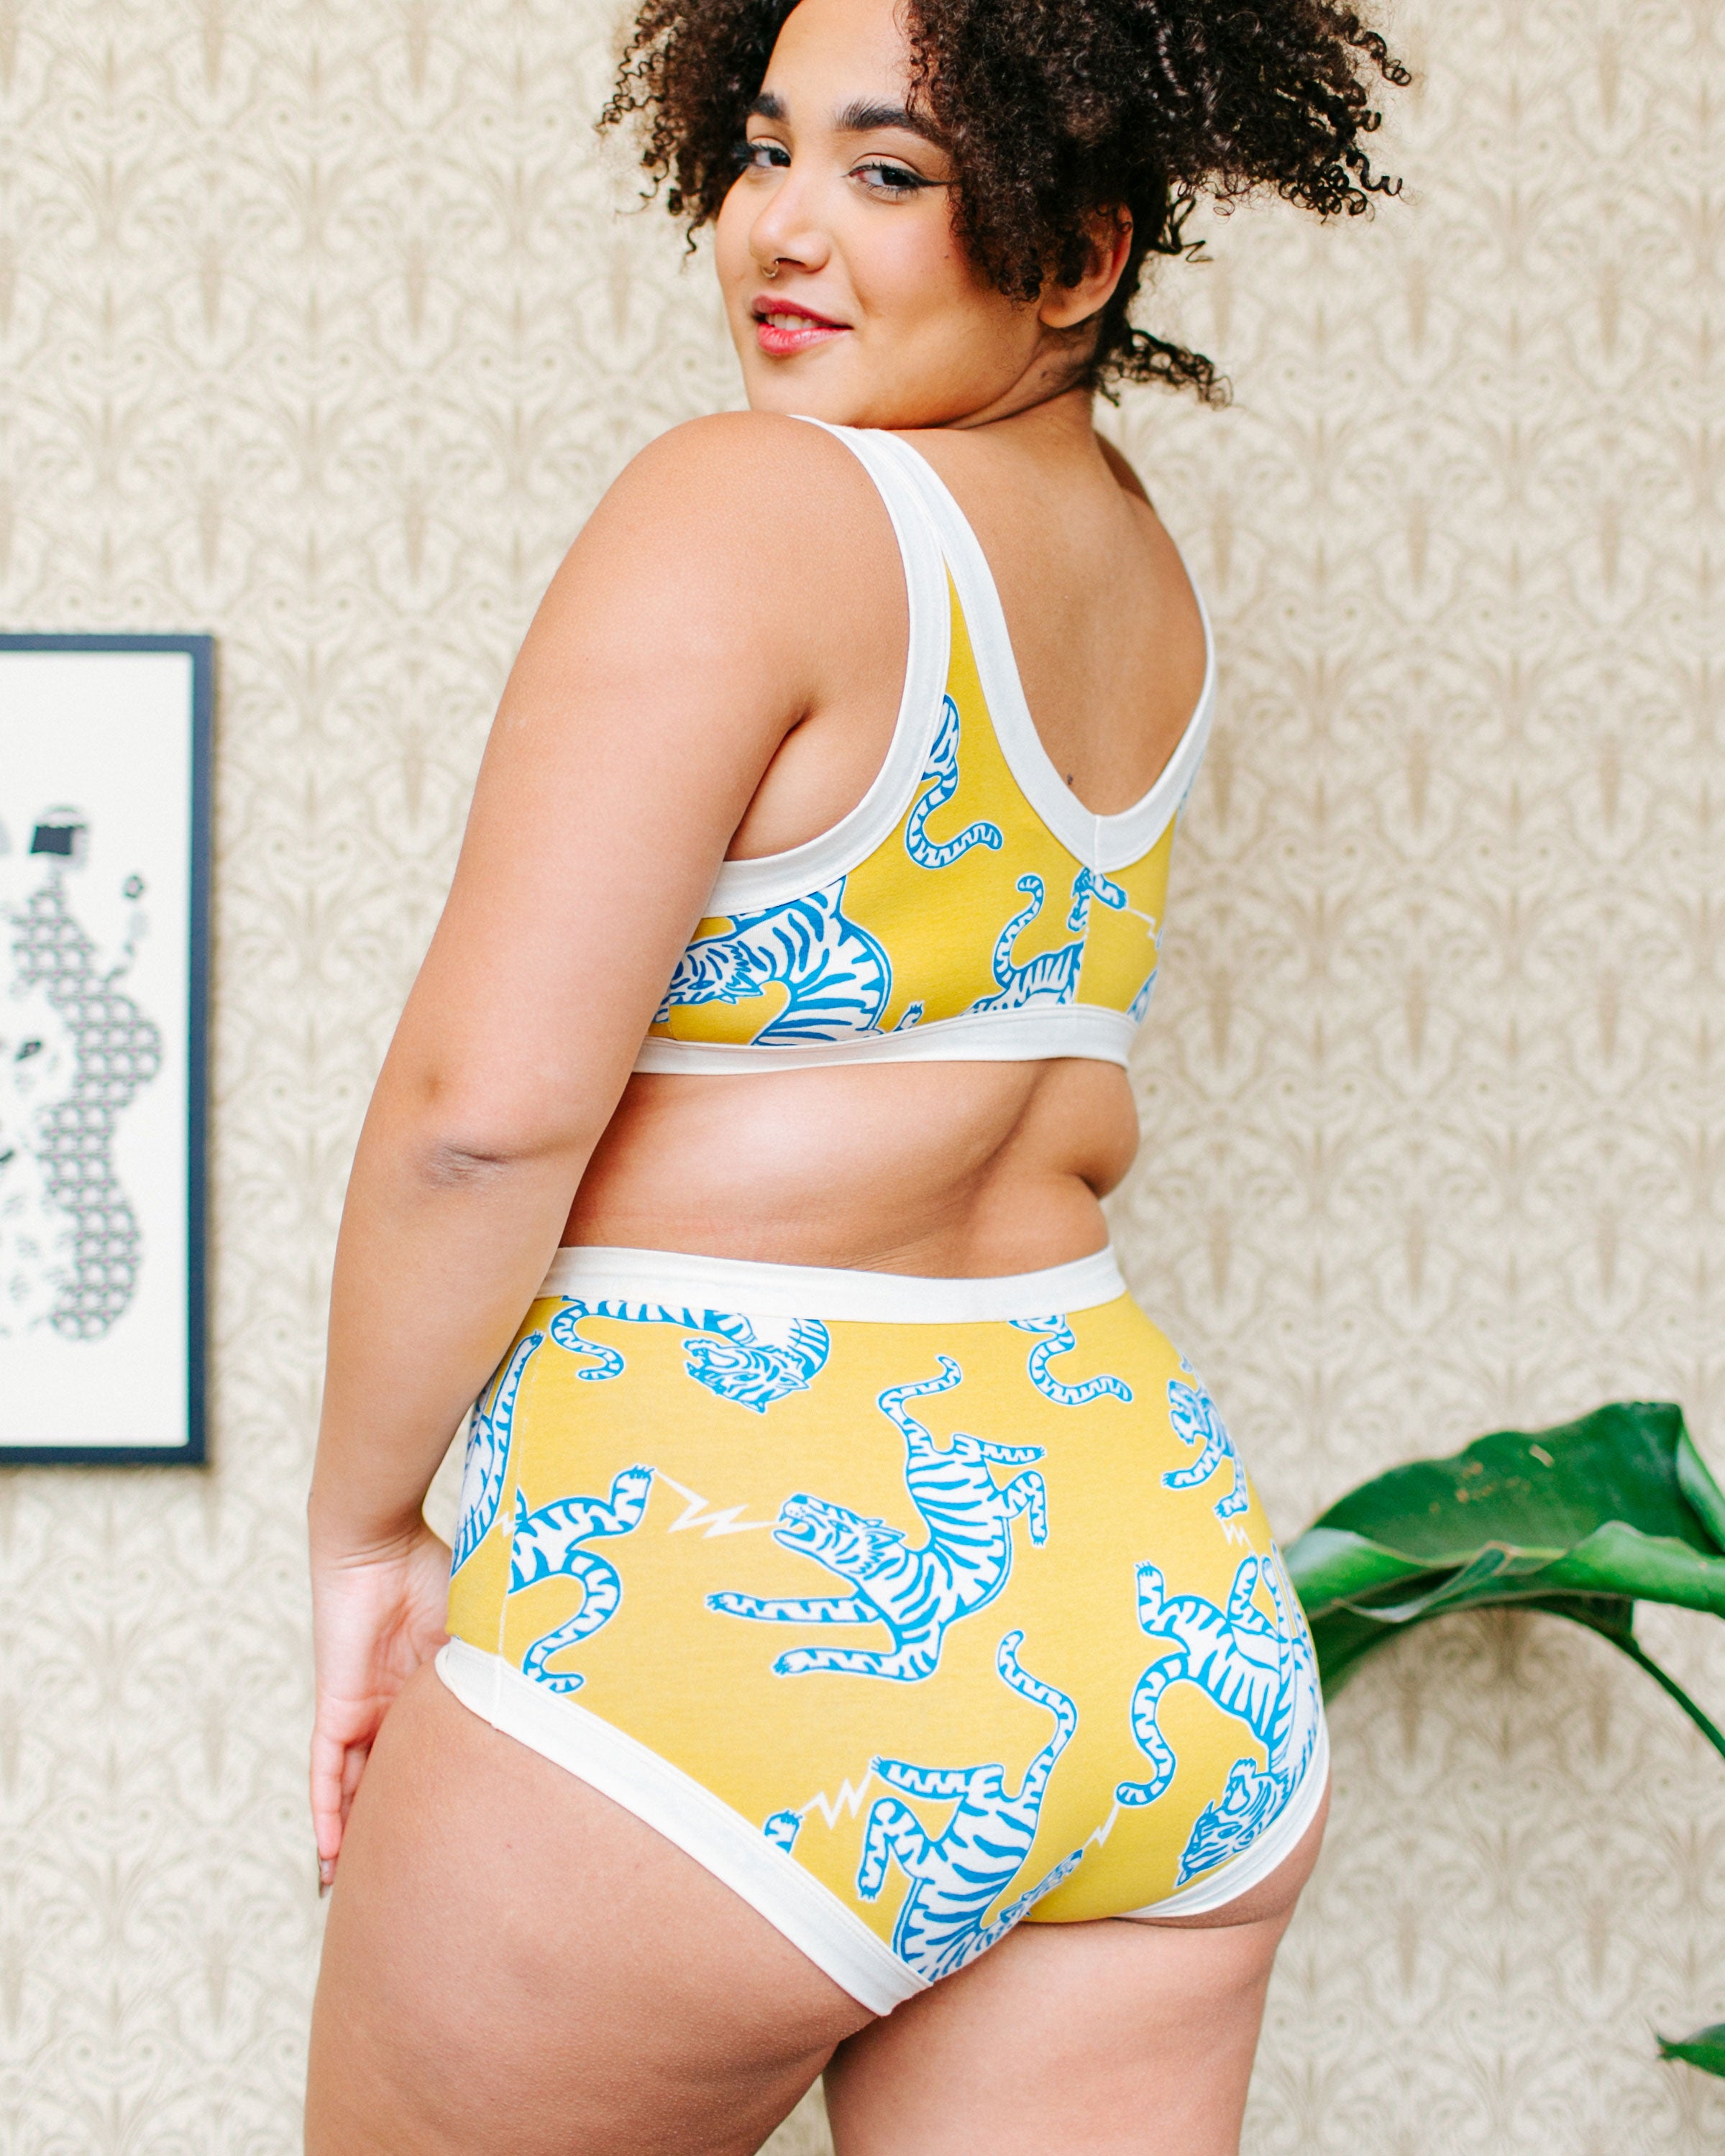 Back of model wearing Thunderpants organic cotton Original style underwear and Bralette in Easy Tiger - chartreuse with blue and white tigers.